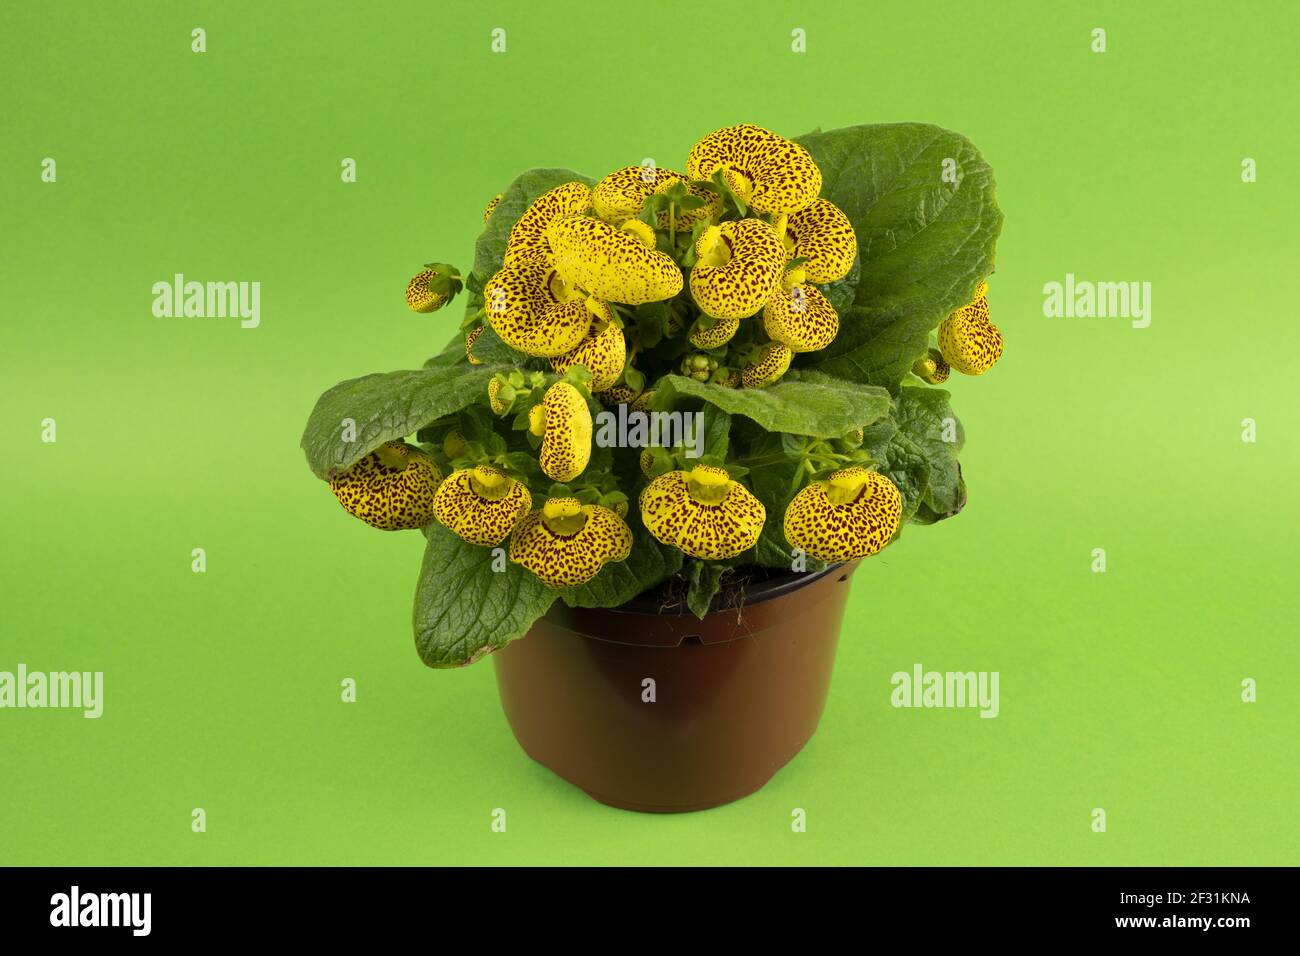 calceolaria integrifolia in pot with green background, top view Stock Photo